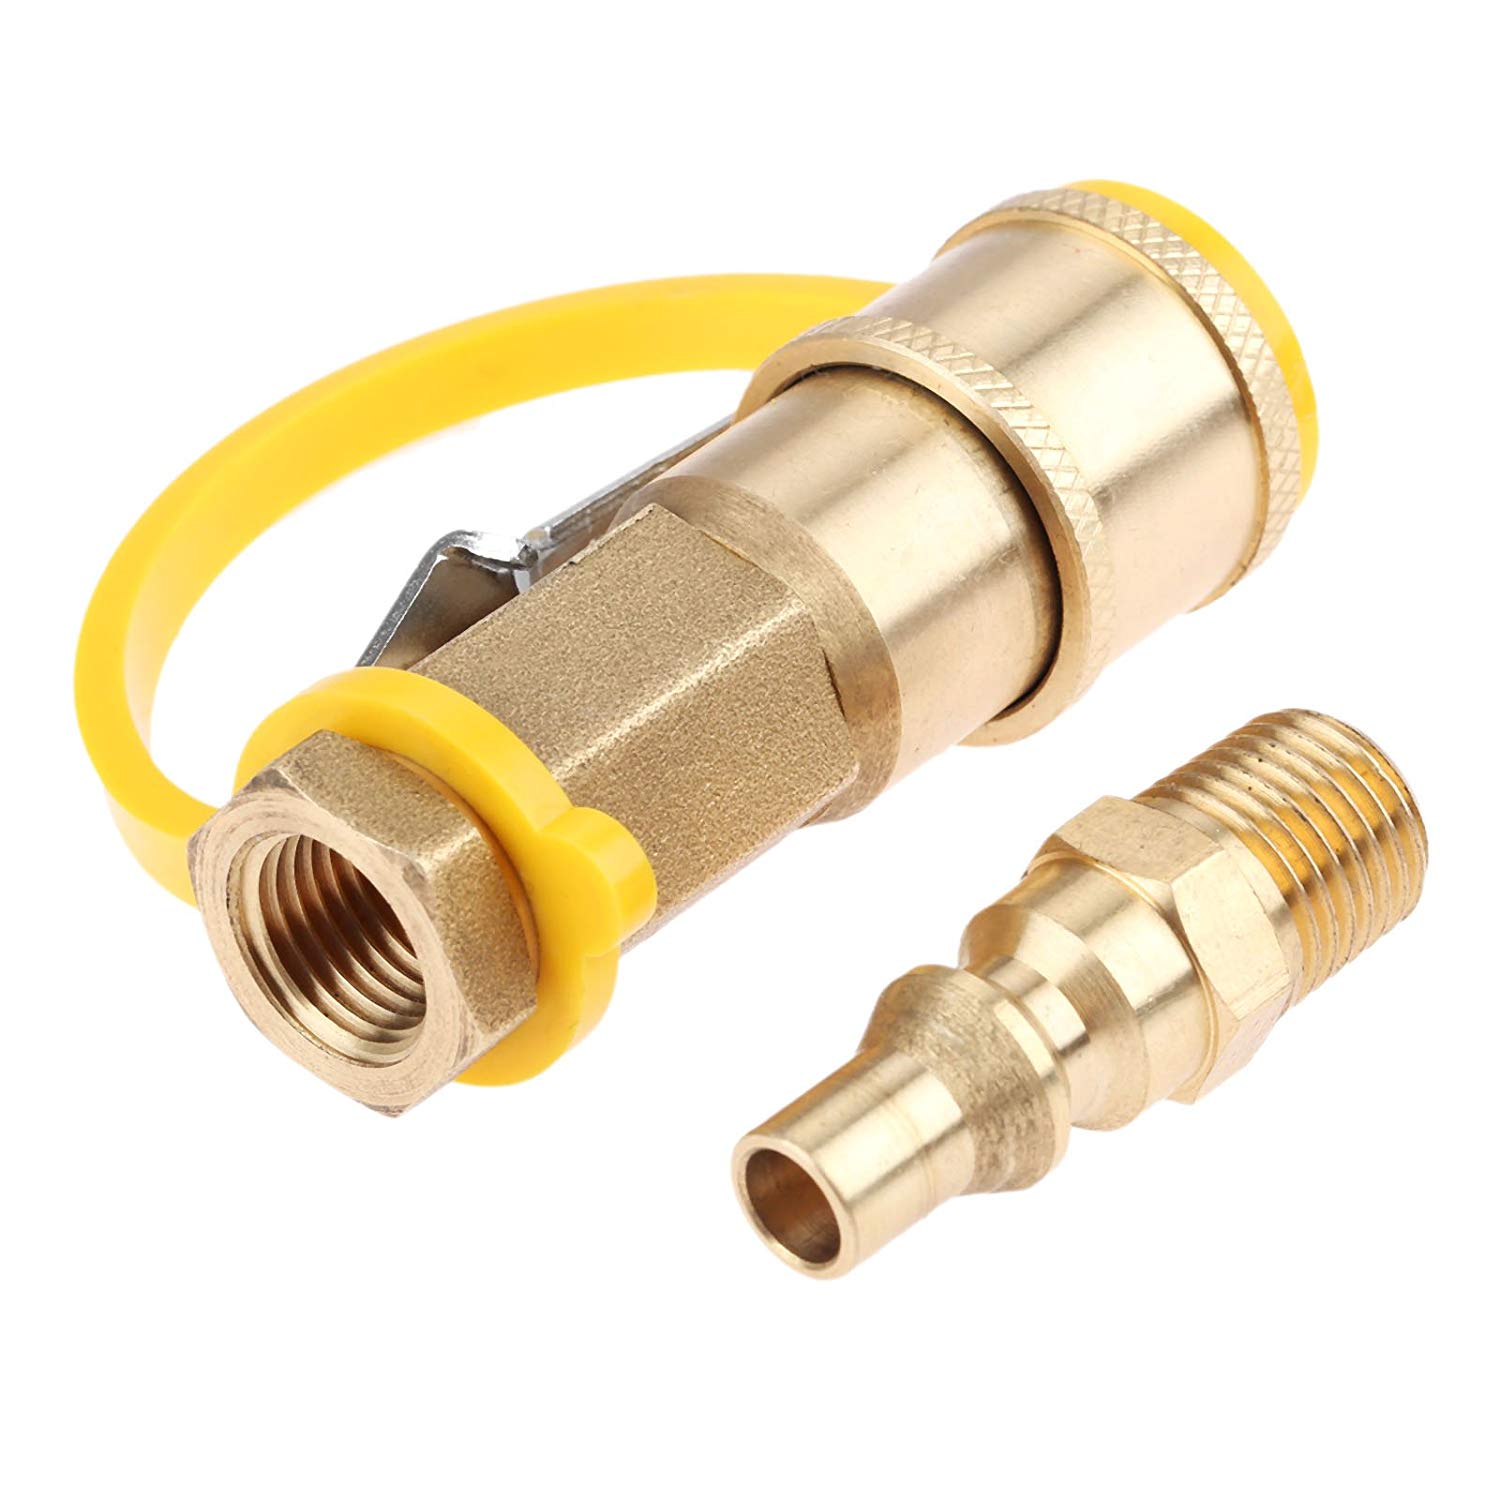 Gas and Water Line Connectors